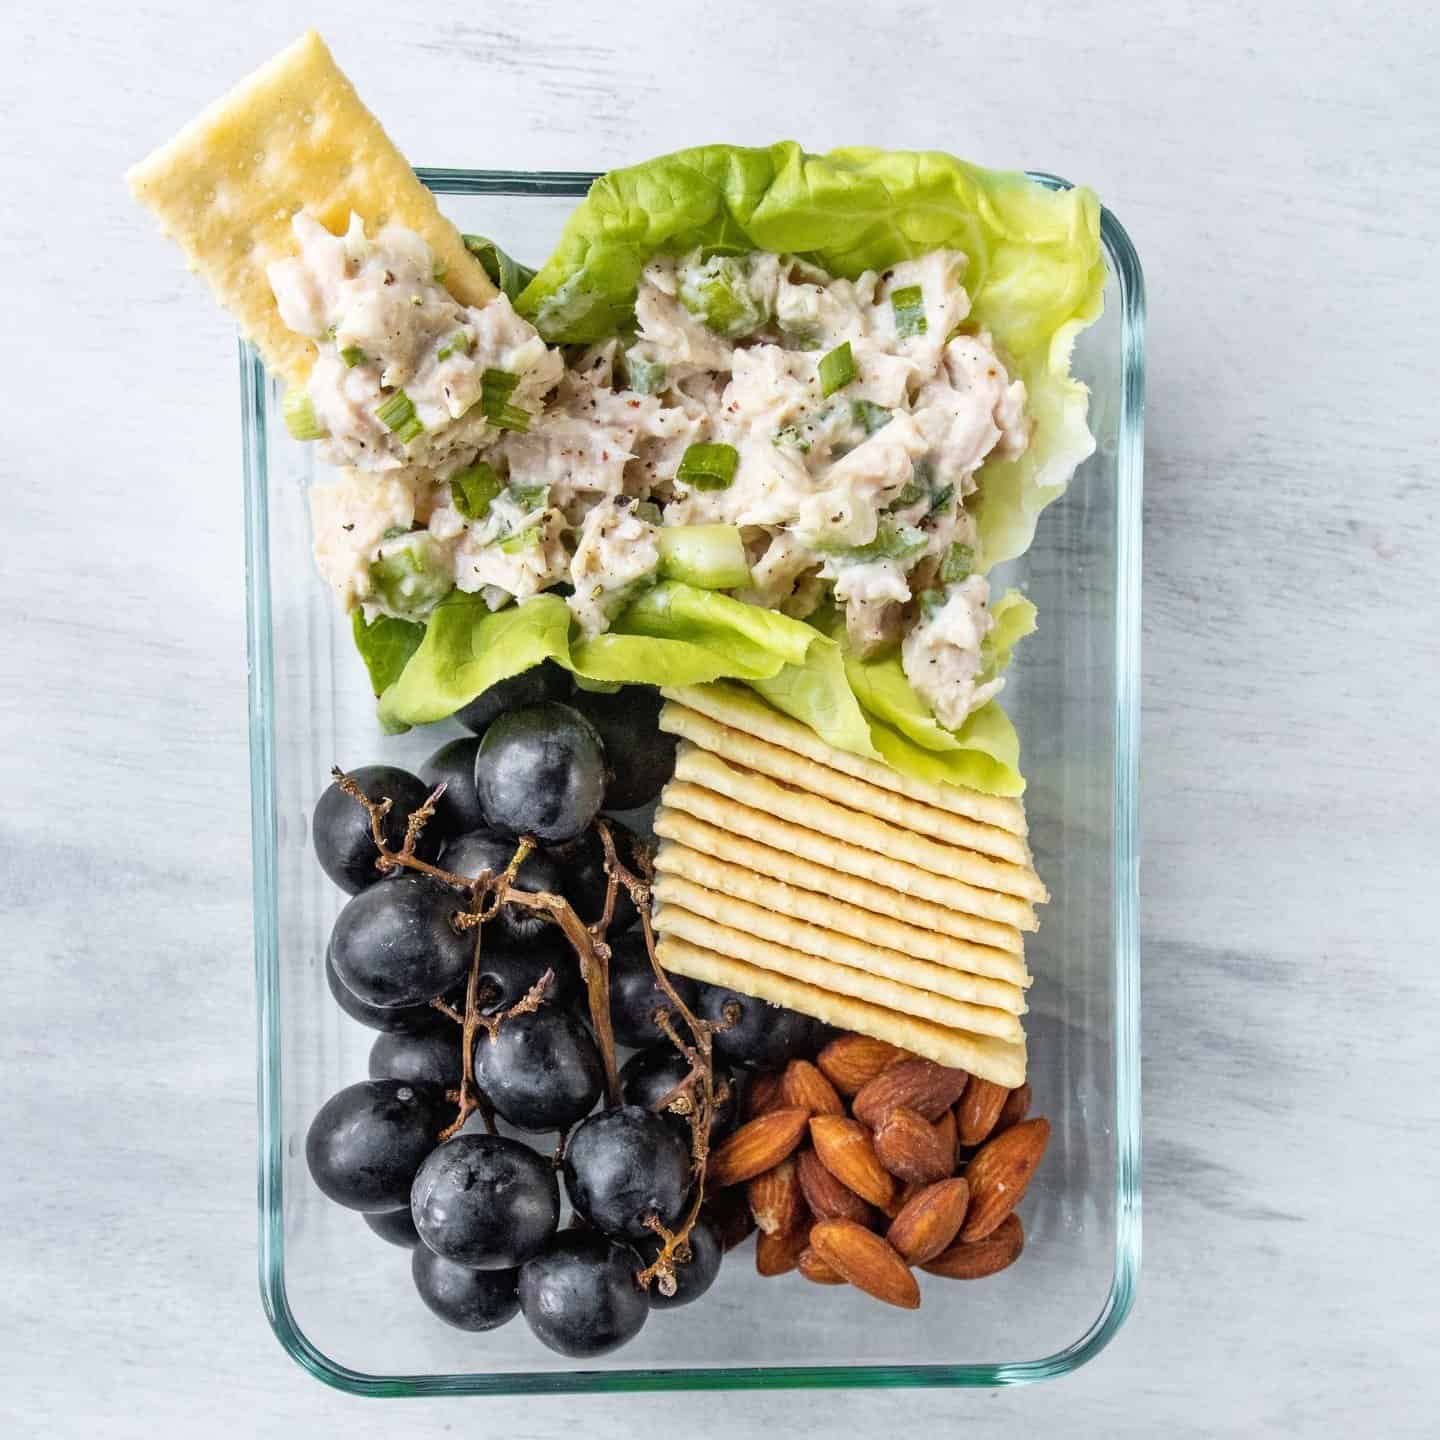 With this Meal Prep Tuna Salad, you can choose between Greek yogurt or traditional mayo. ⁣
⁣
Add your favorite sides to make this more sweet or savory. Either way, this is an easy, no-cook lunch option to prep for the week. ⁣
⁣
Recipe in the bio.🤩⁣
⁣
#meganvskitchen #easyrecipes #quickmeals #food52 #thekitchn #buzzfeedfood #bhgfood #todayfood #tunasalad #mealprepsunday #mealprep #mealprepping